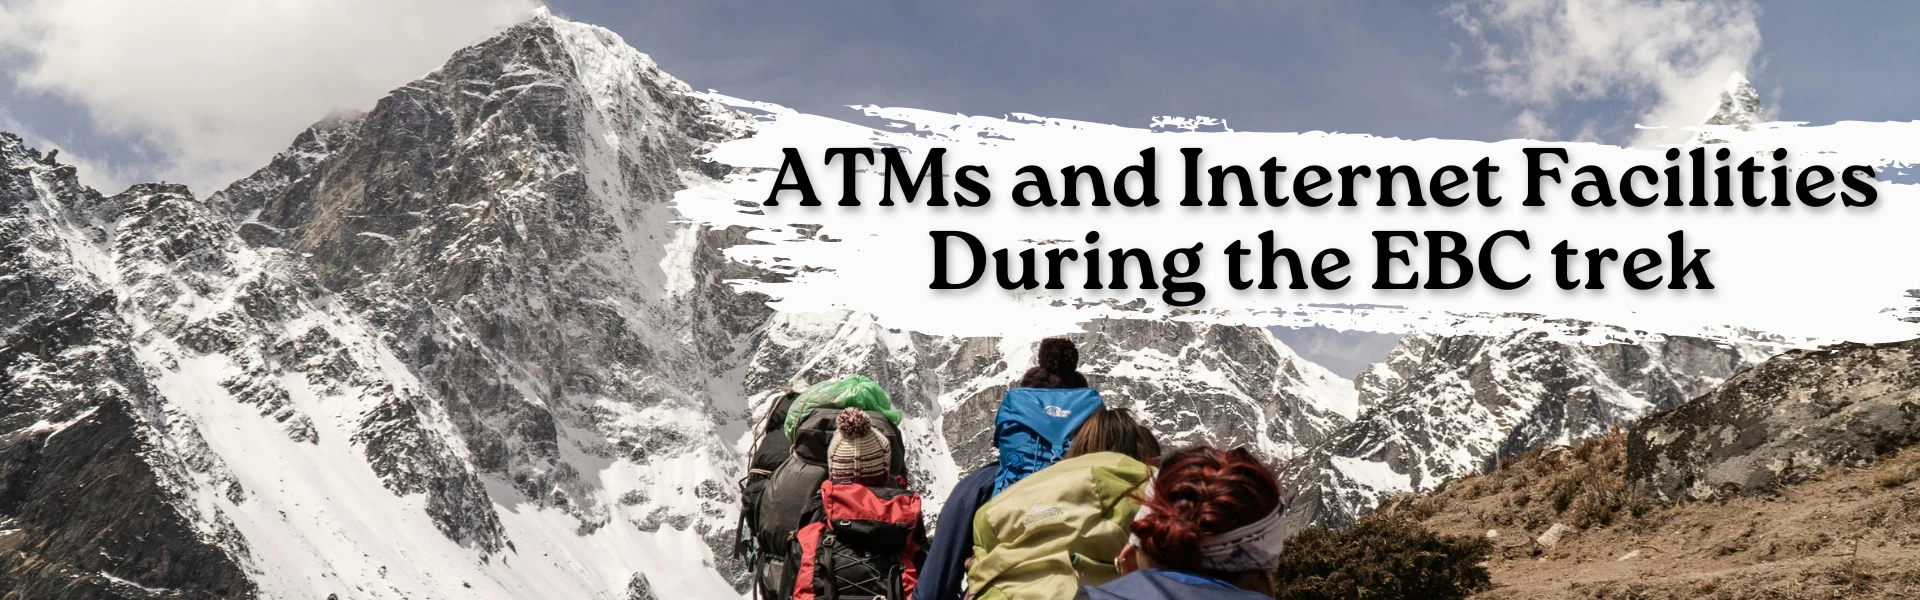 ATMs And Internet Facilities During The EBC Trek